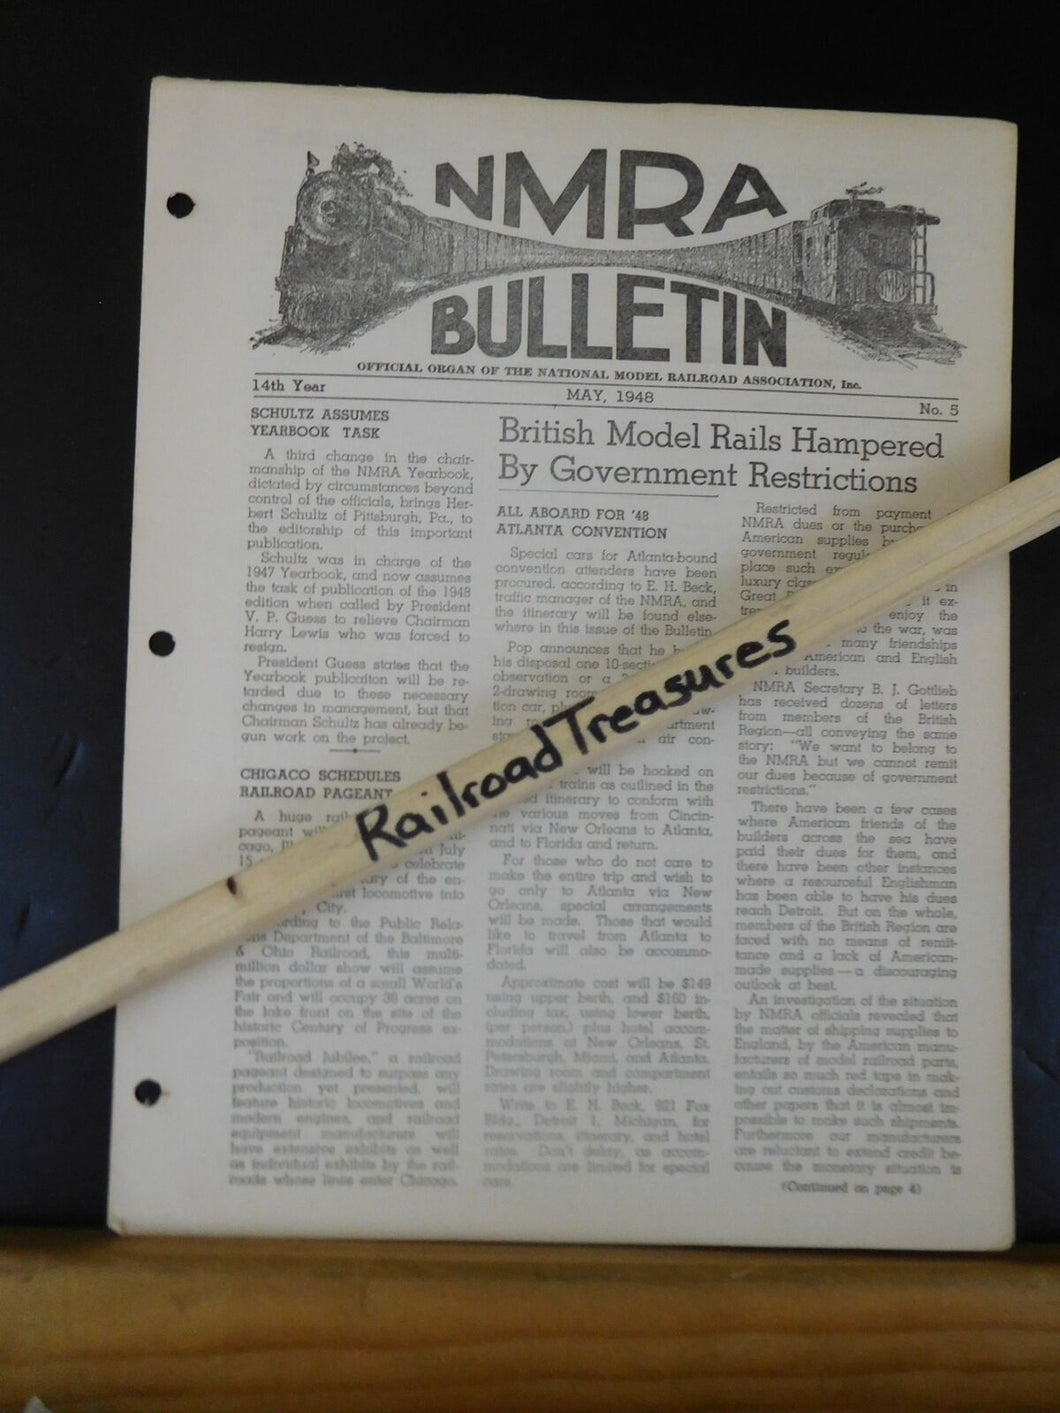 NMRA Bulletin 1948 May #5 of 14th Year British Model Rails hampered by Govt rest